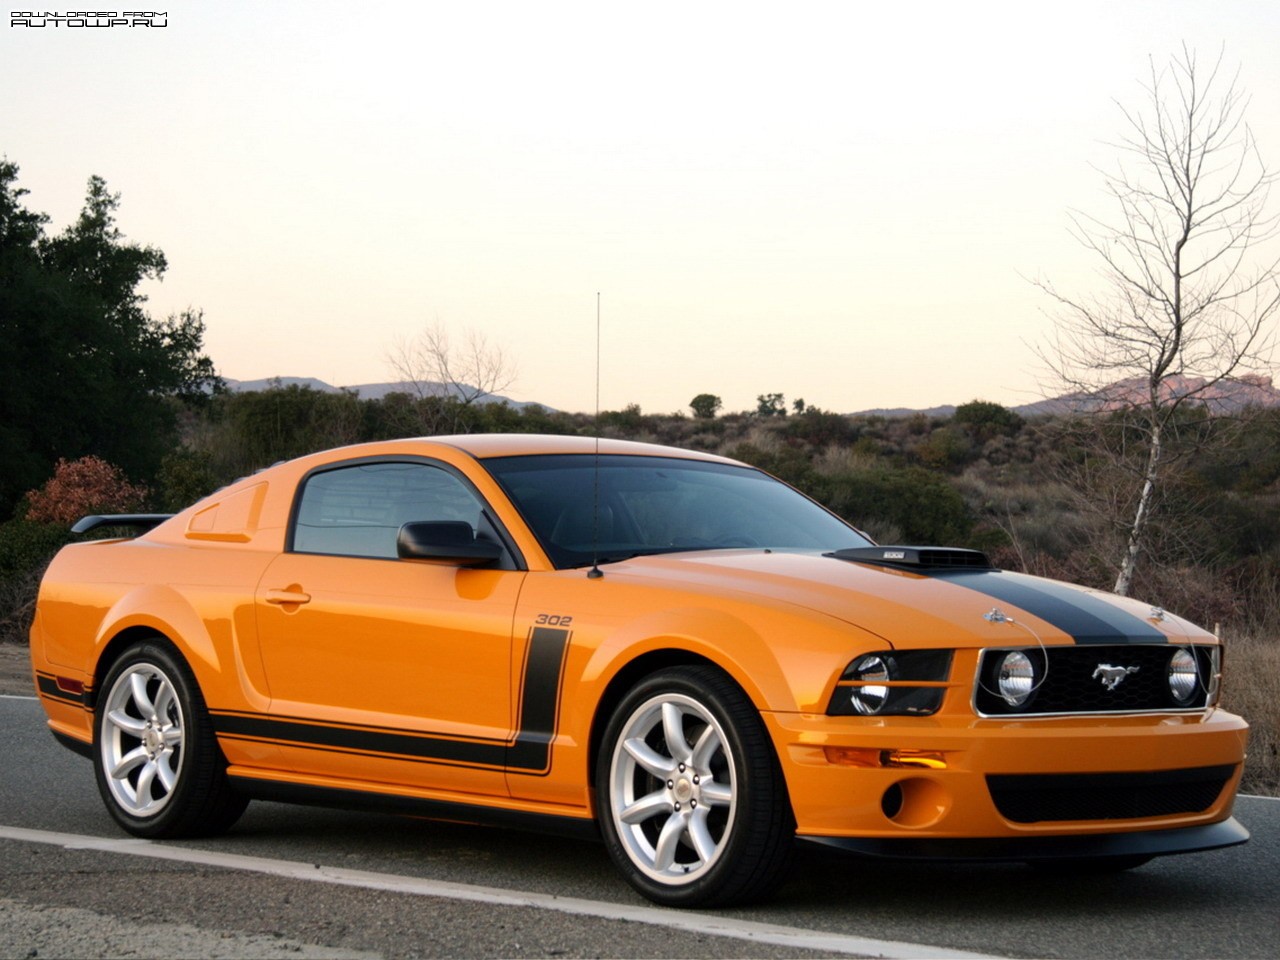 General 1280x960 car vehicle orange cars Ford Ford Mustang muscle cars American cars watermarked